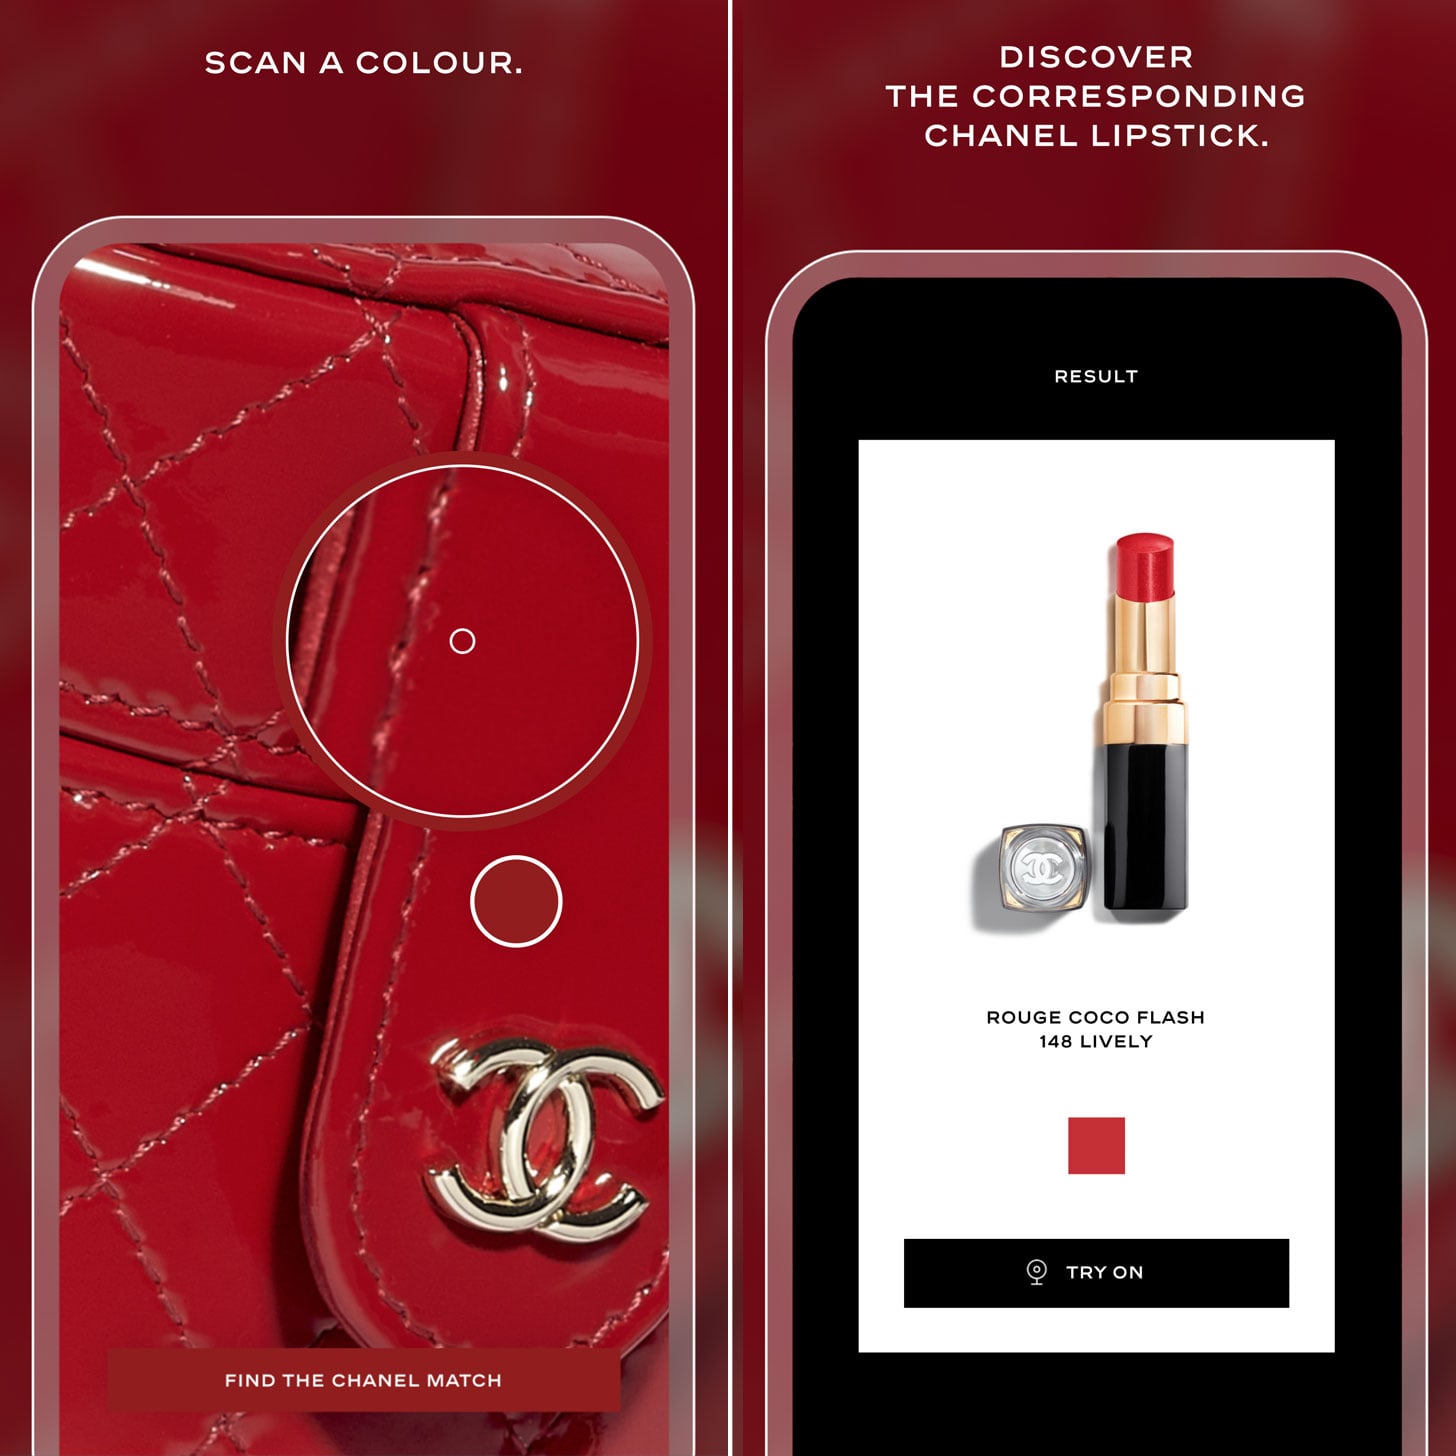 Fancy a color? Chanel's Lipscanner app will match a lipstick from any image  for you - Luxurylaunches